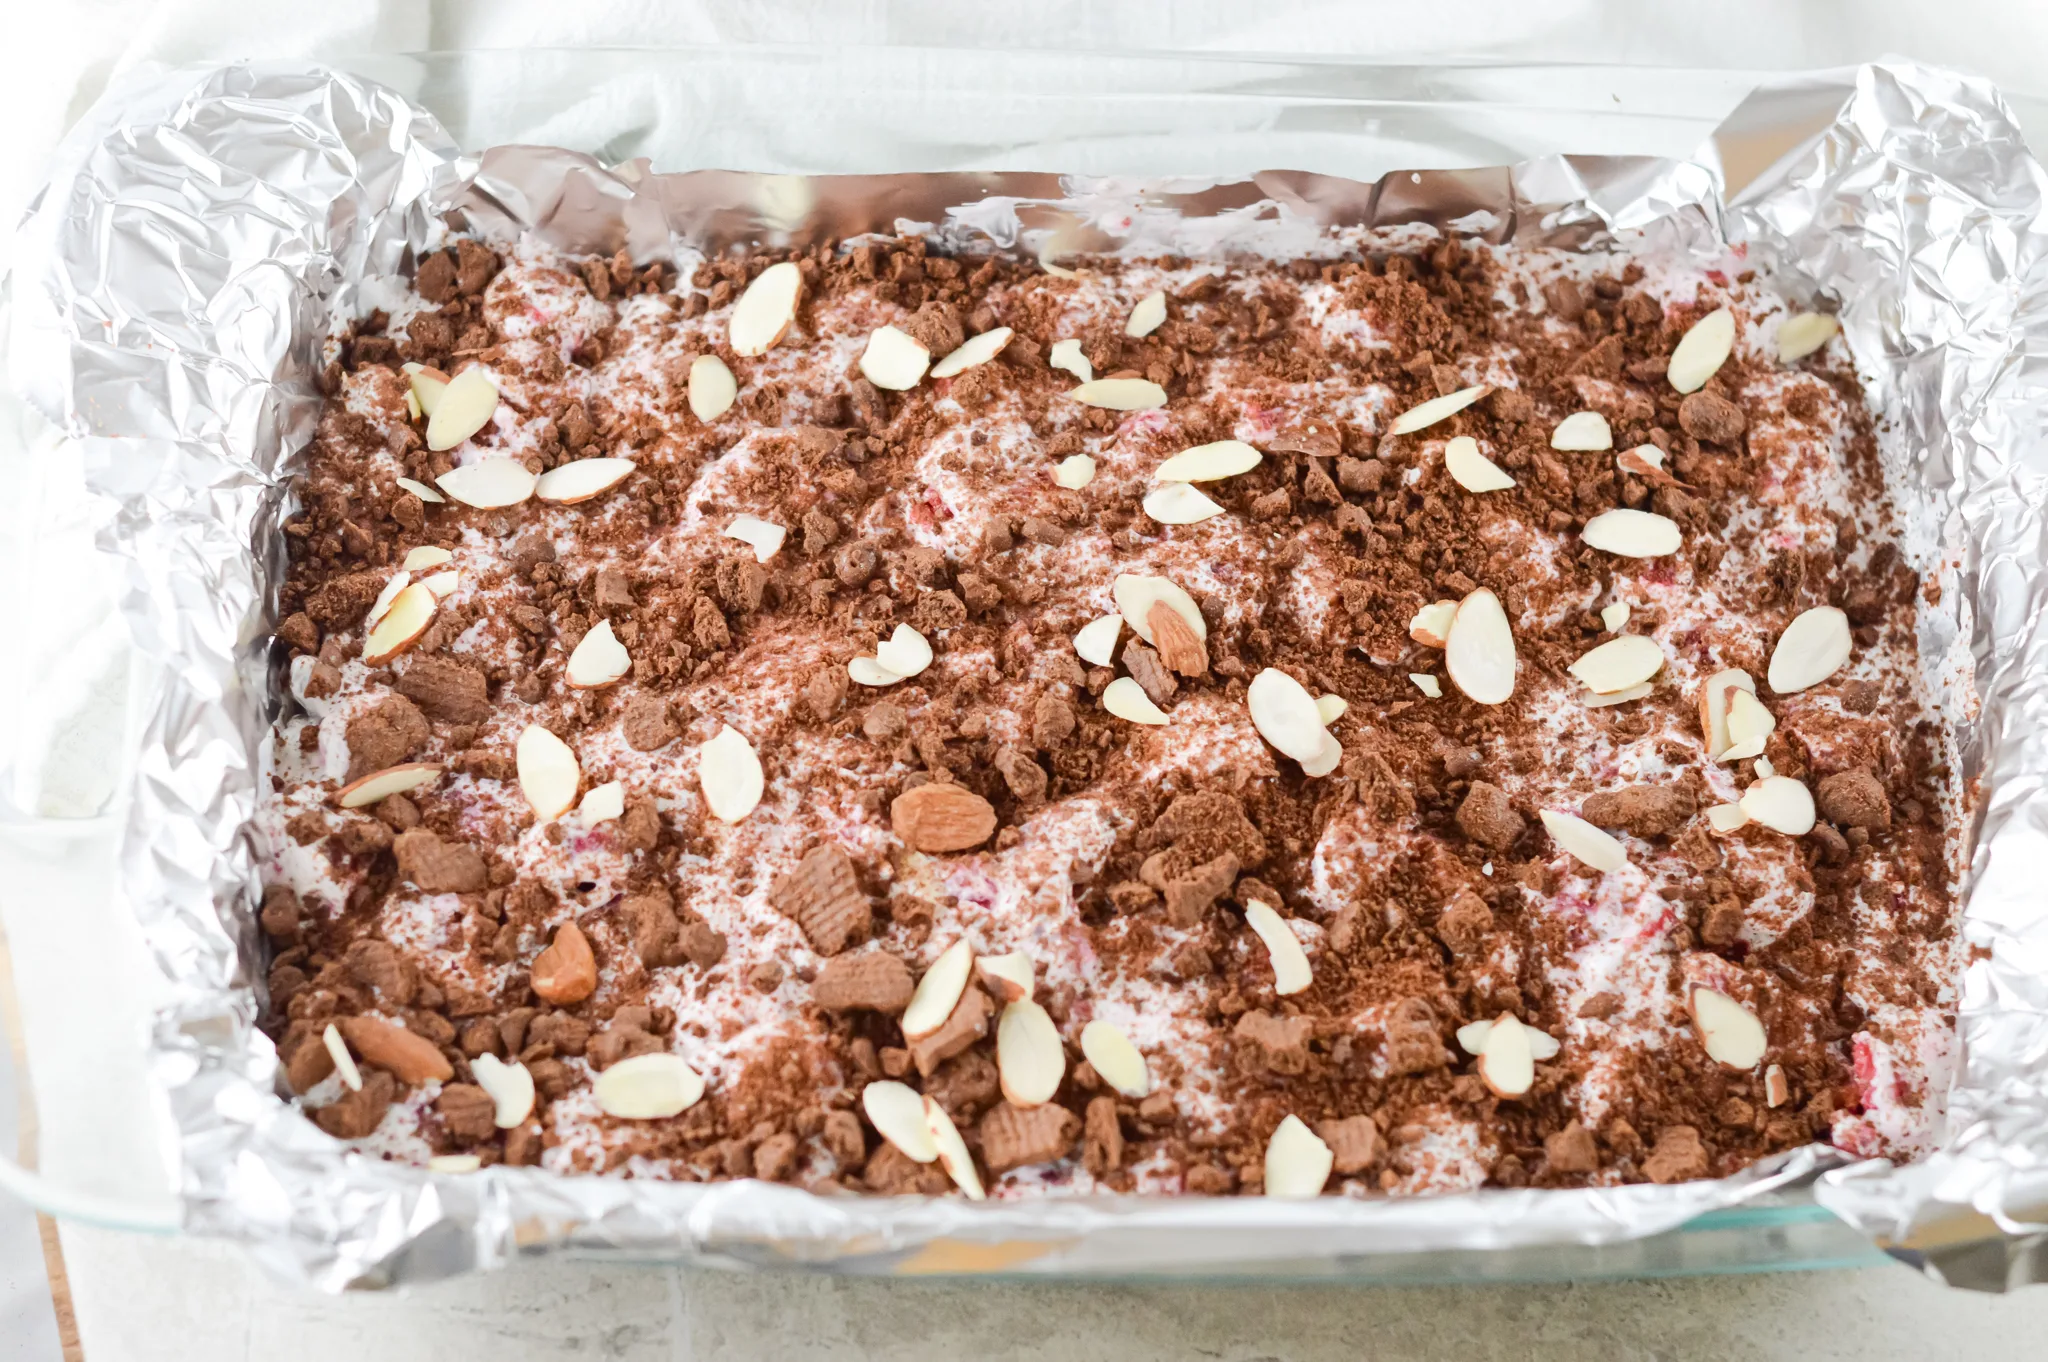 Making Weight Watchers frozen yogurt bark is fun and easy. This yogurt bark is a great snack for any healthy lifestyle! 